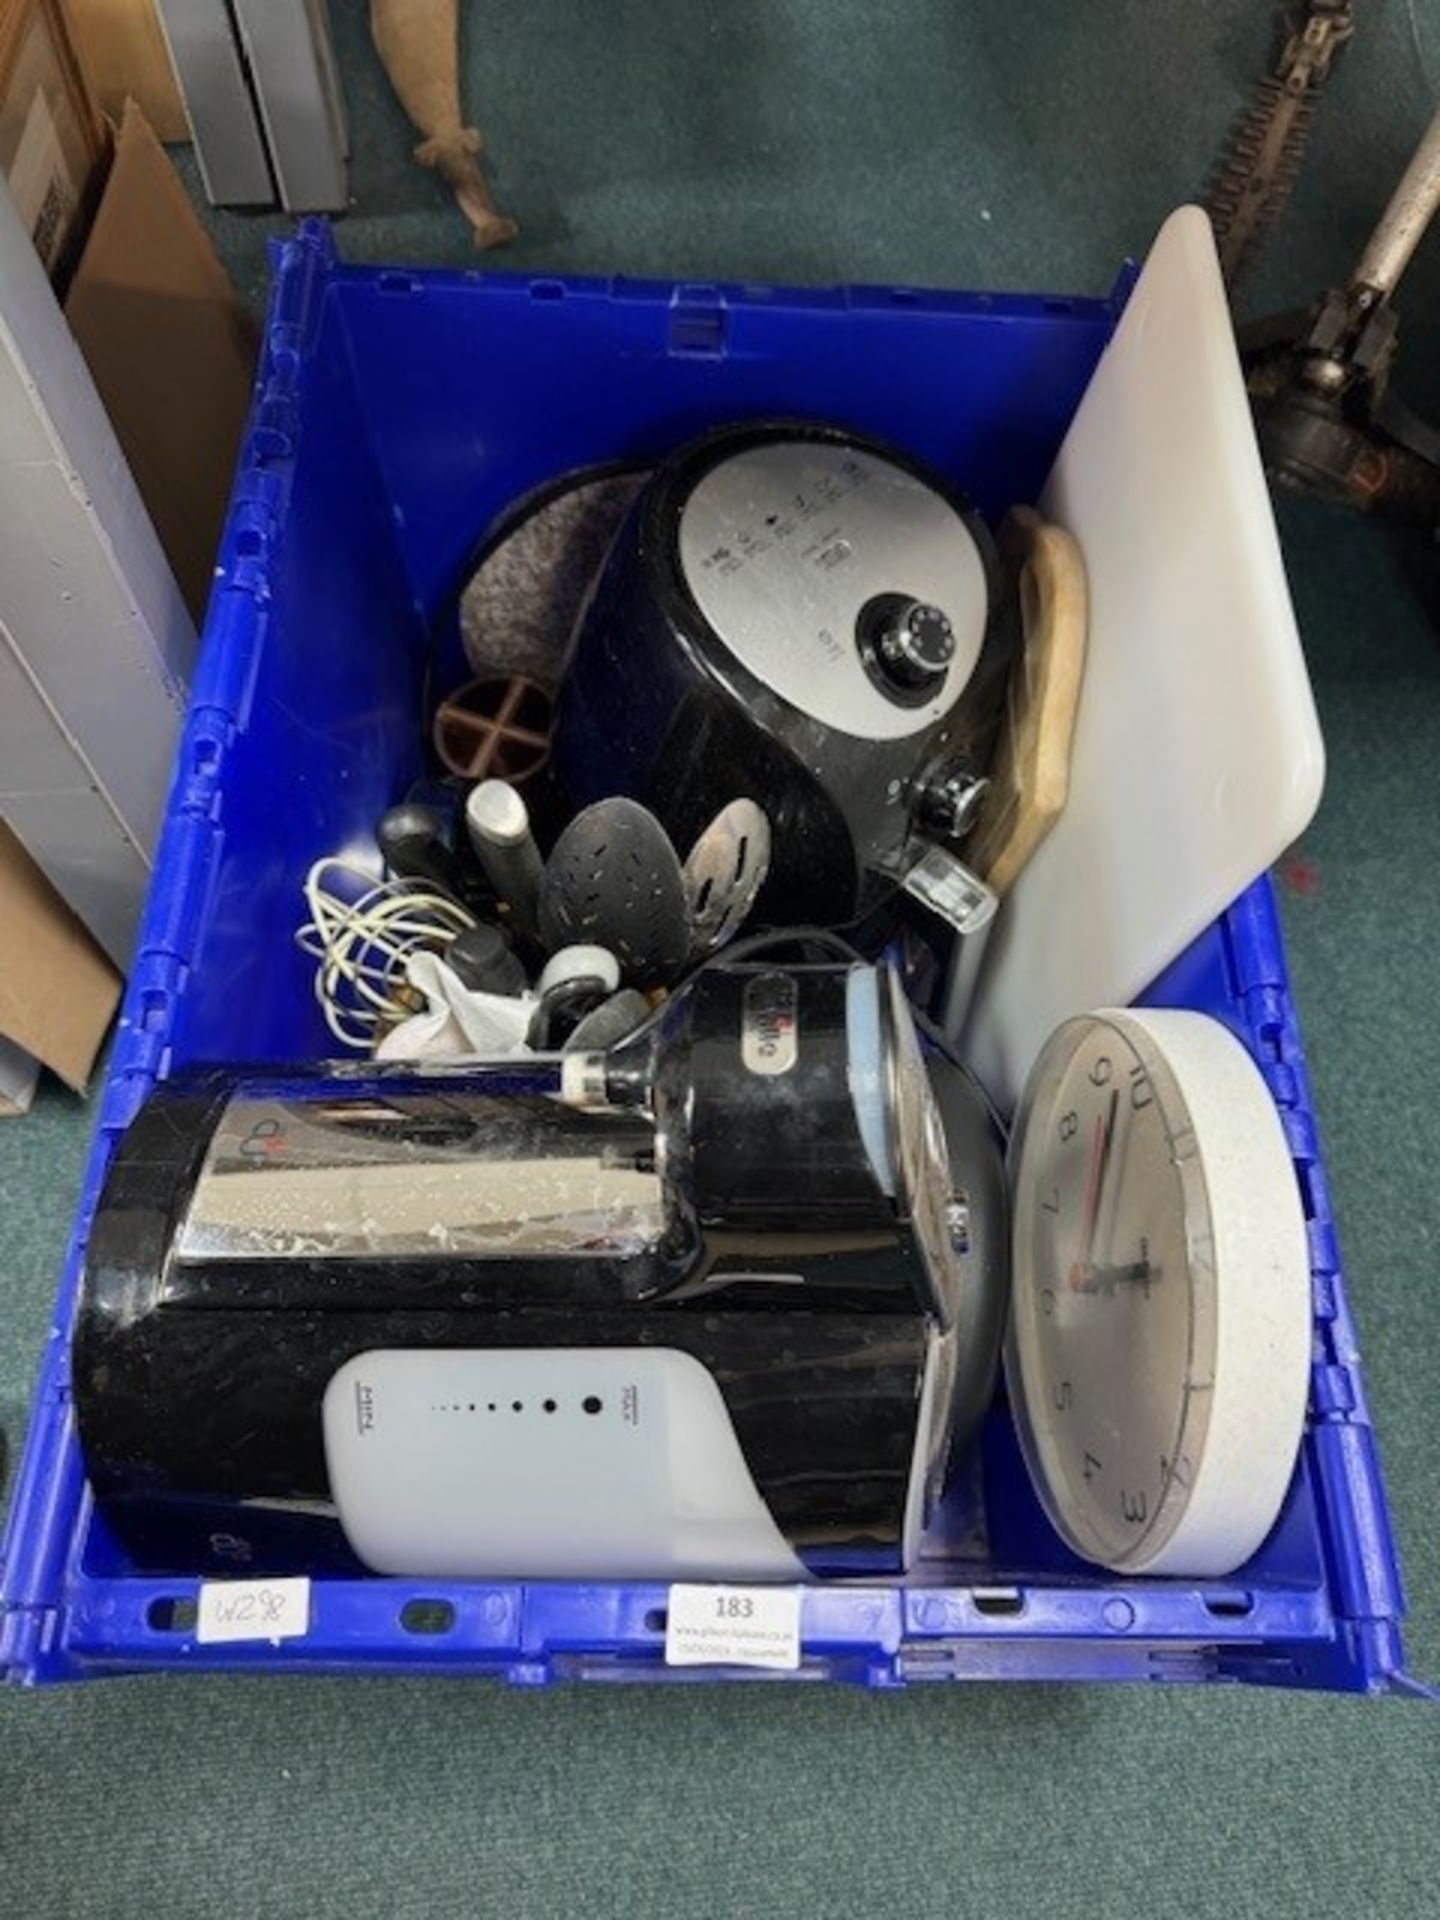 Kitchenware Including Air Fryer and Utensils etc.